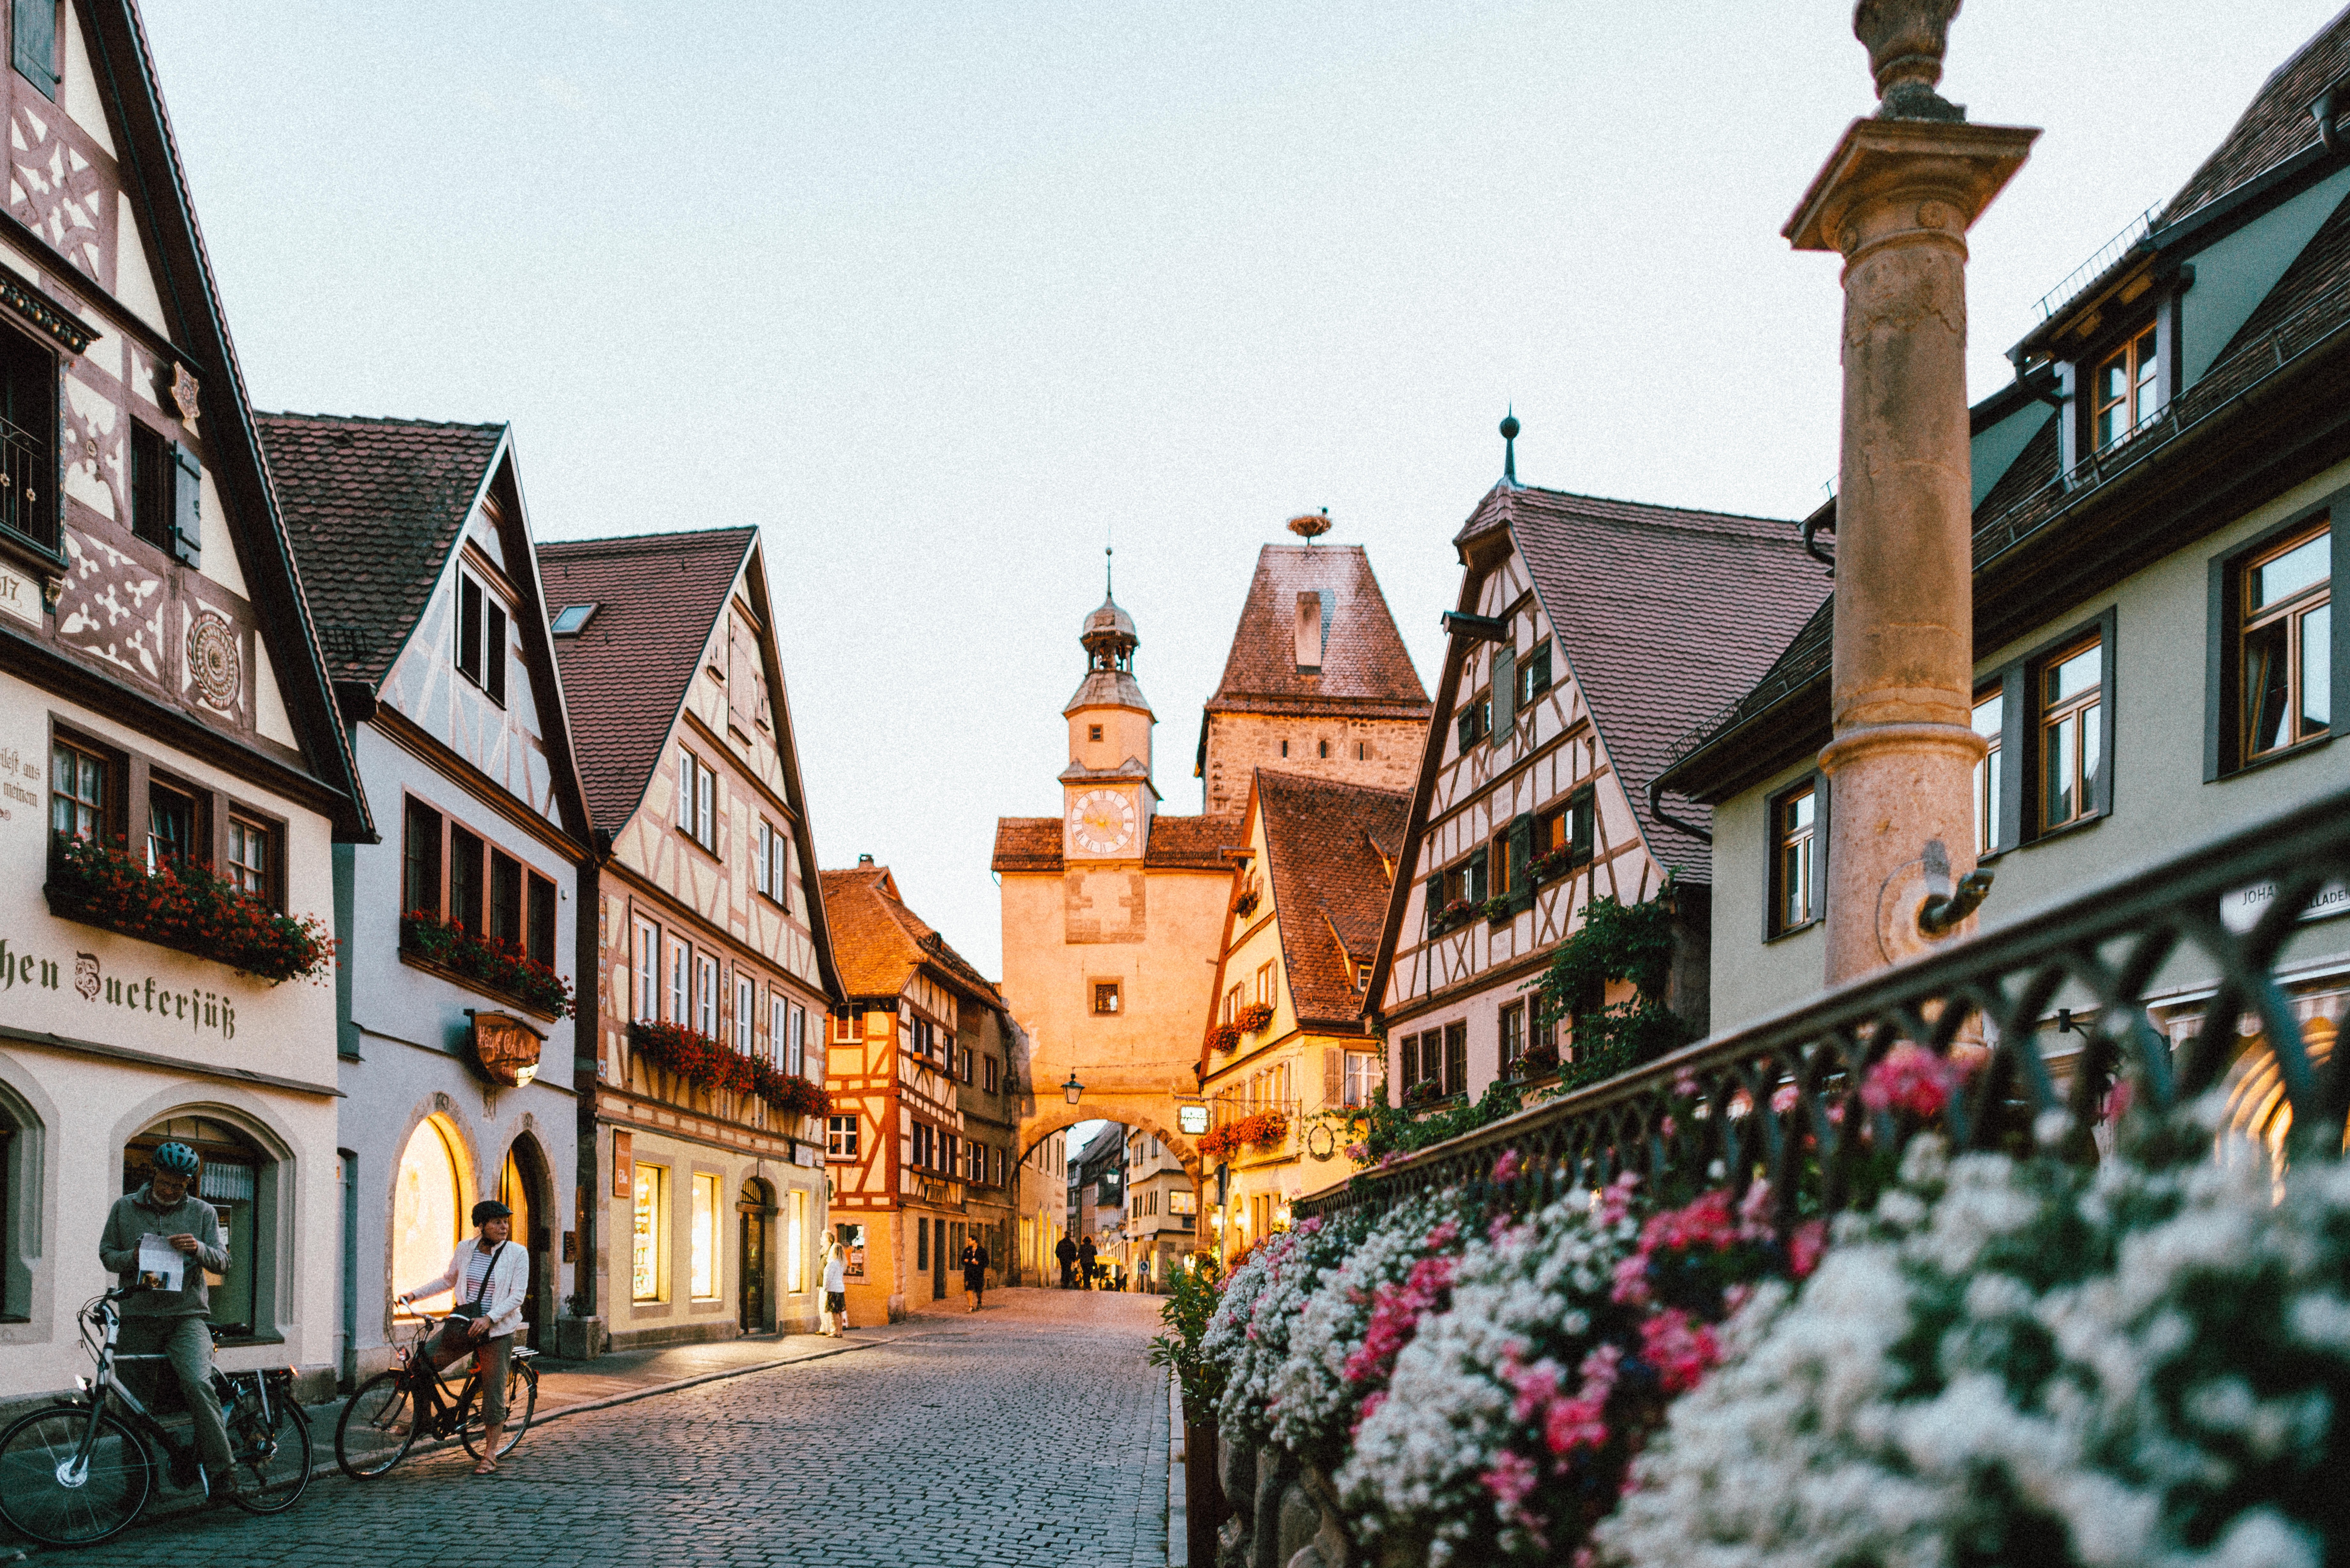 Chinese tourism in Germany: Chinese perceptions of German cities | Daxue Consulting